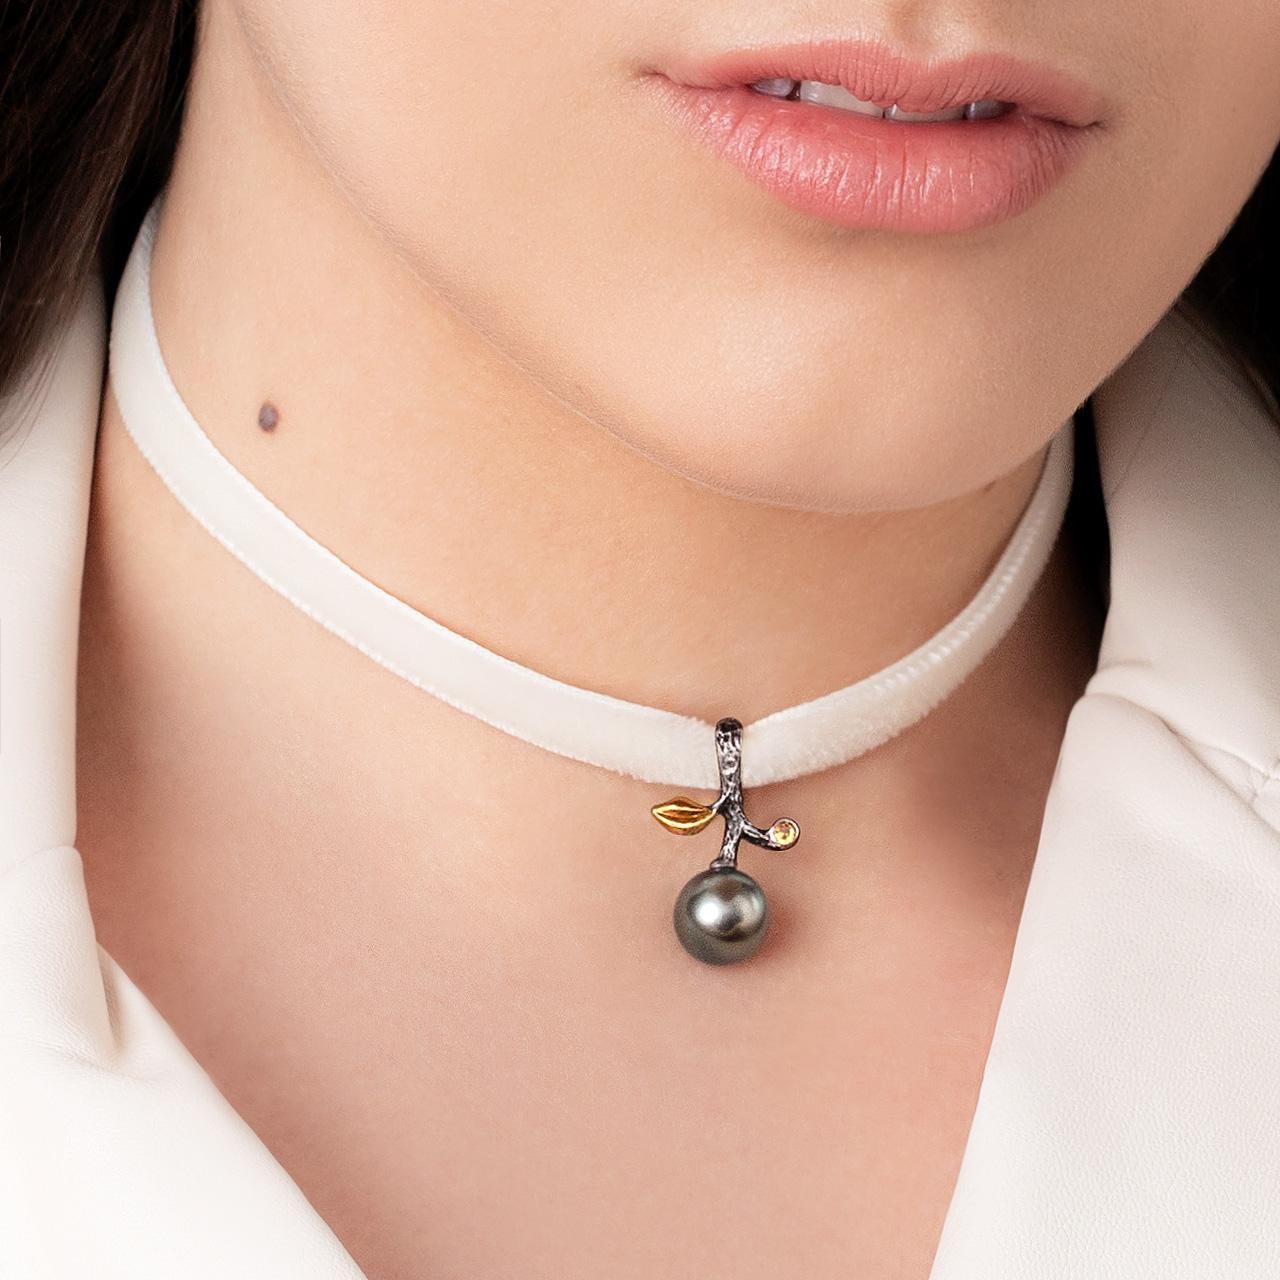 - 1 Round Yellow Sapphire - 0,06 ct
- 10-0,5 mm Dark Tahitian pearl
- 14K White Gold 
- Weight: 2.98 g
This pendant from the Eden collection features a lustrous Dark Tahitian pearl of 10-10,5 mm diameter. The design is complete with a yellow